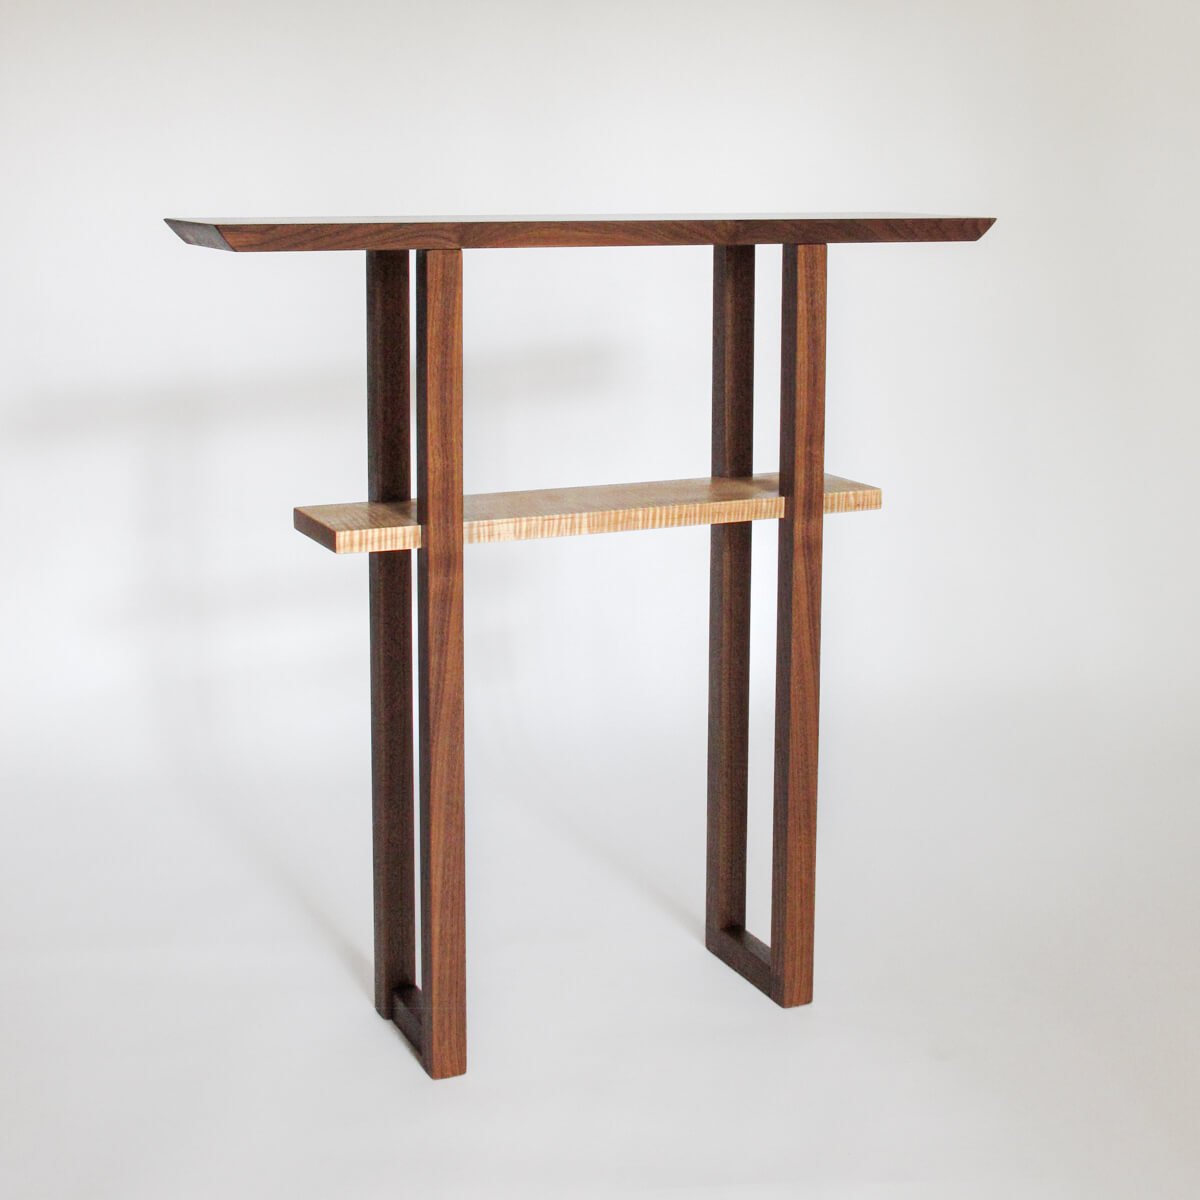 Designer Narrow Entry Table - minimalist console table for small entryways